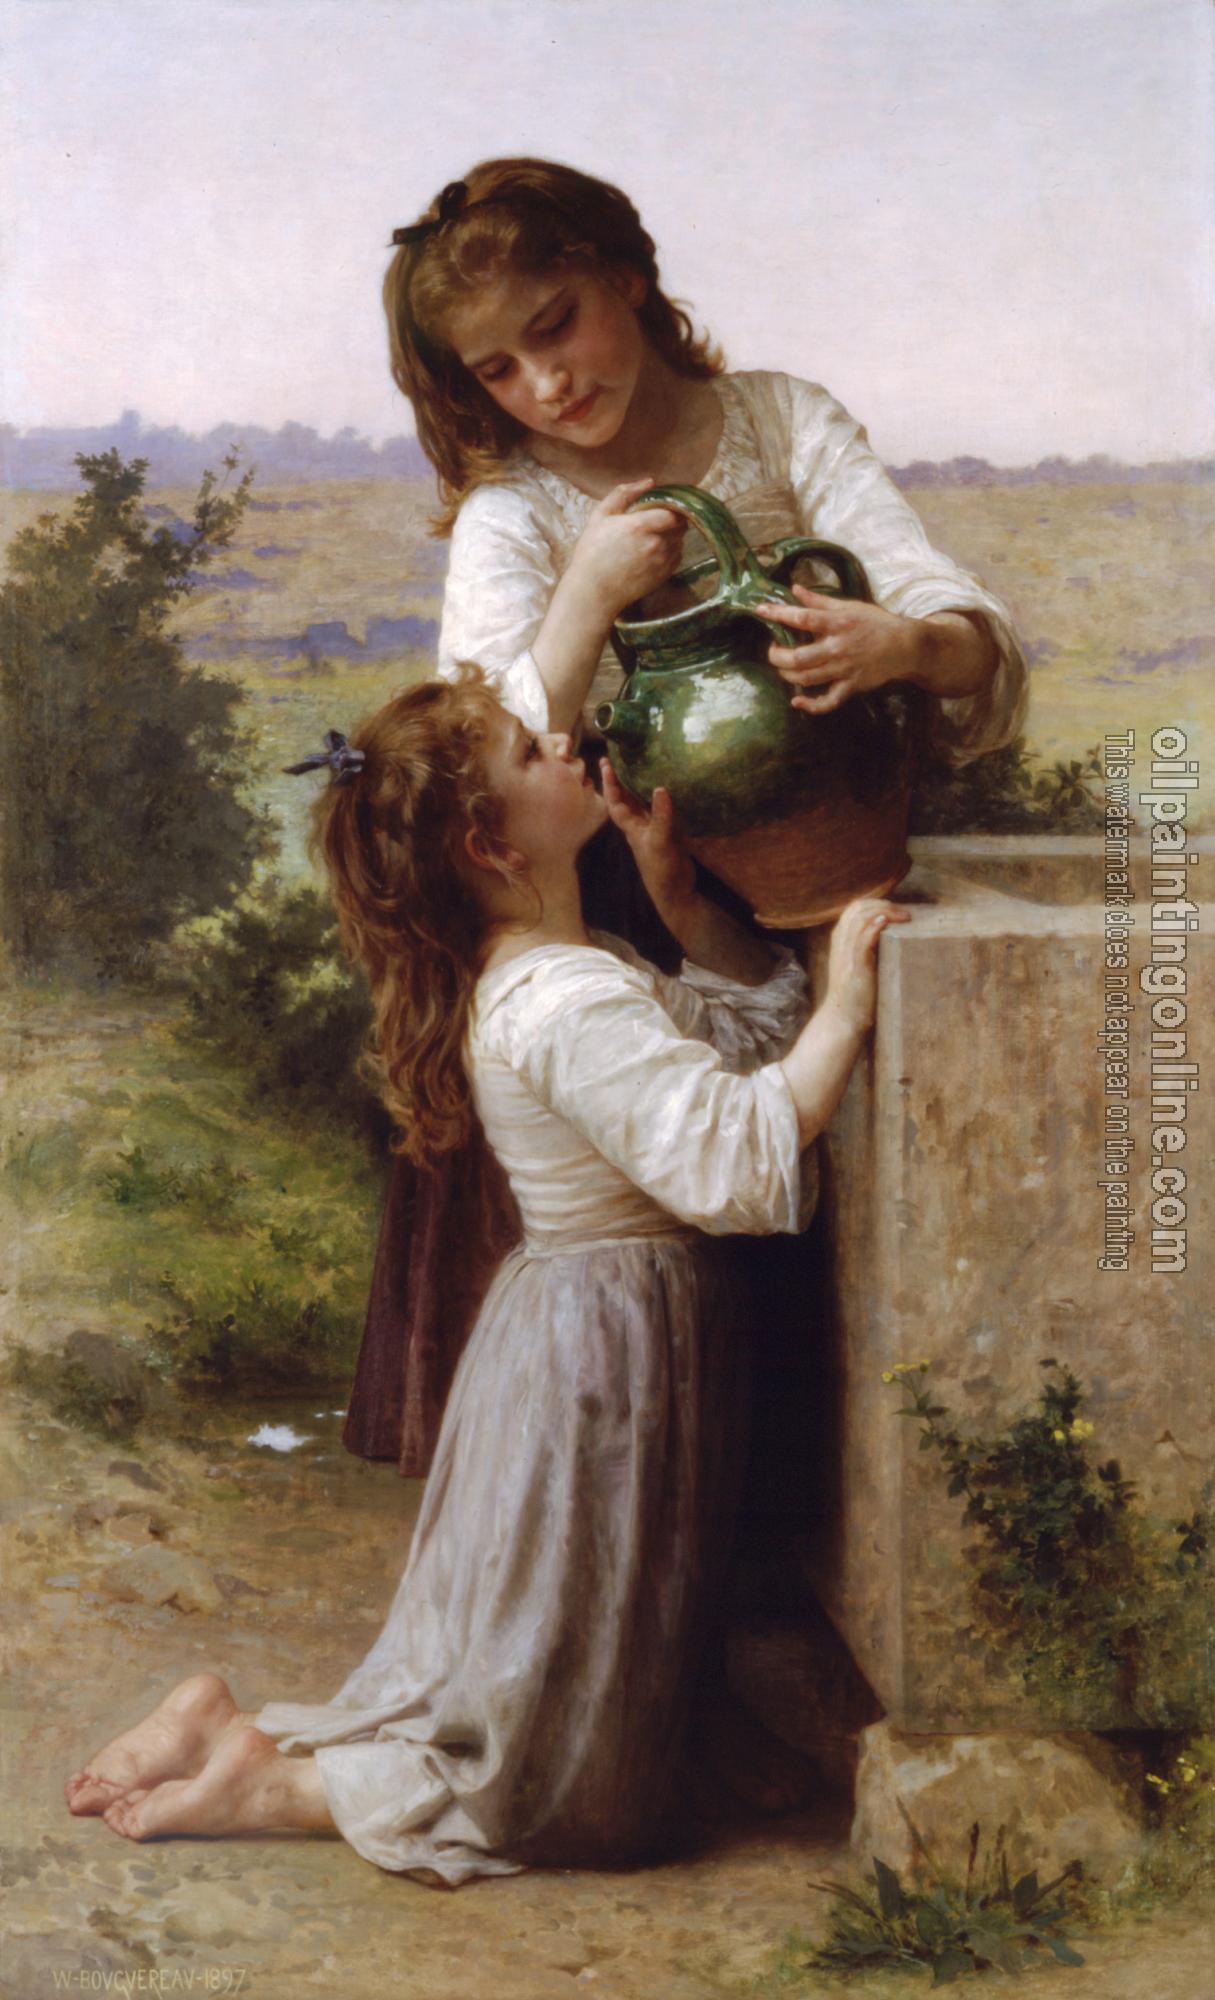 Bouguereau, William-Adolphe - At the Fountain